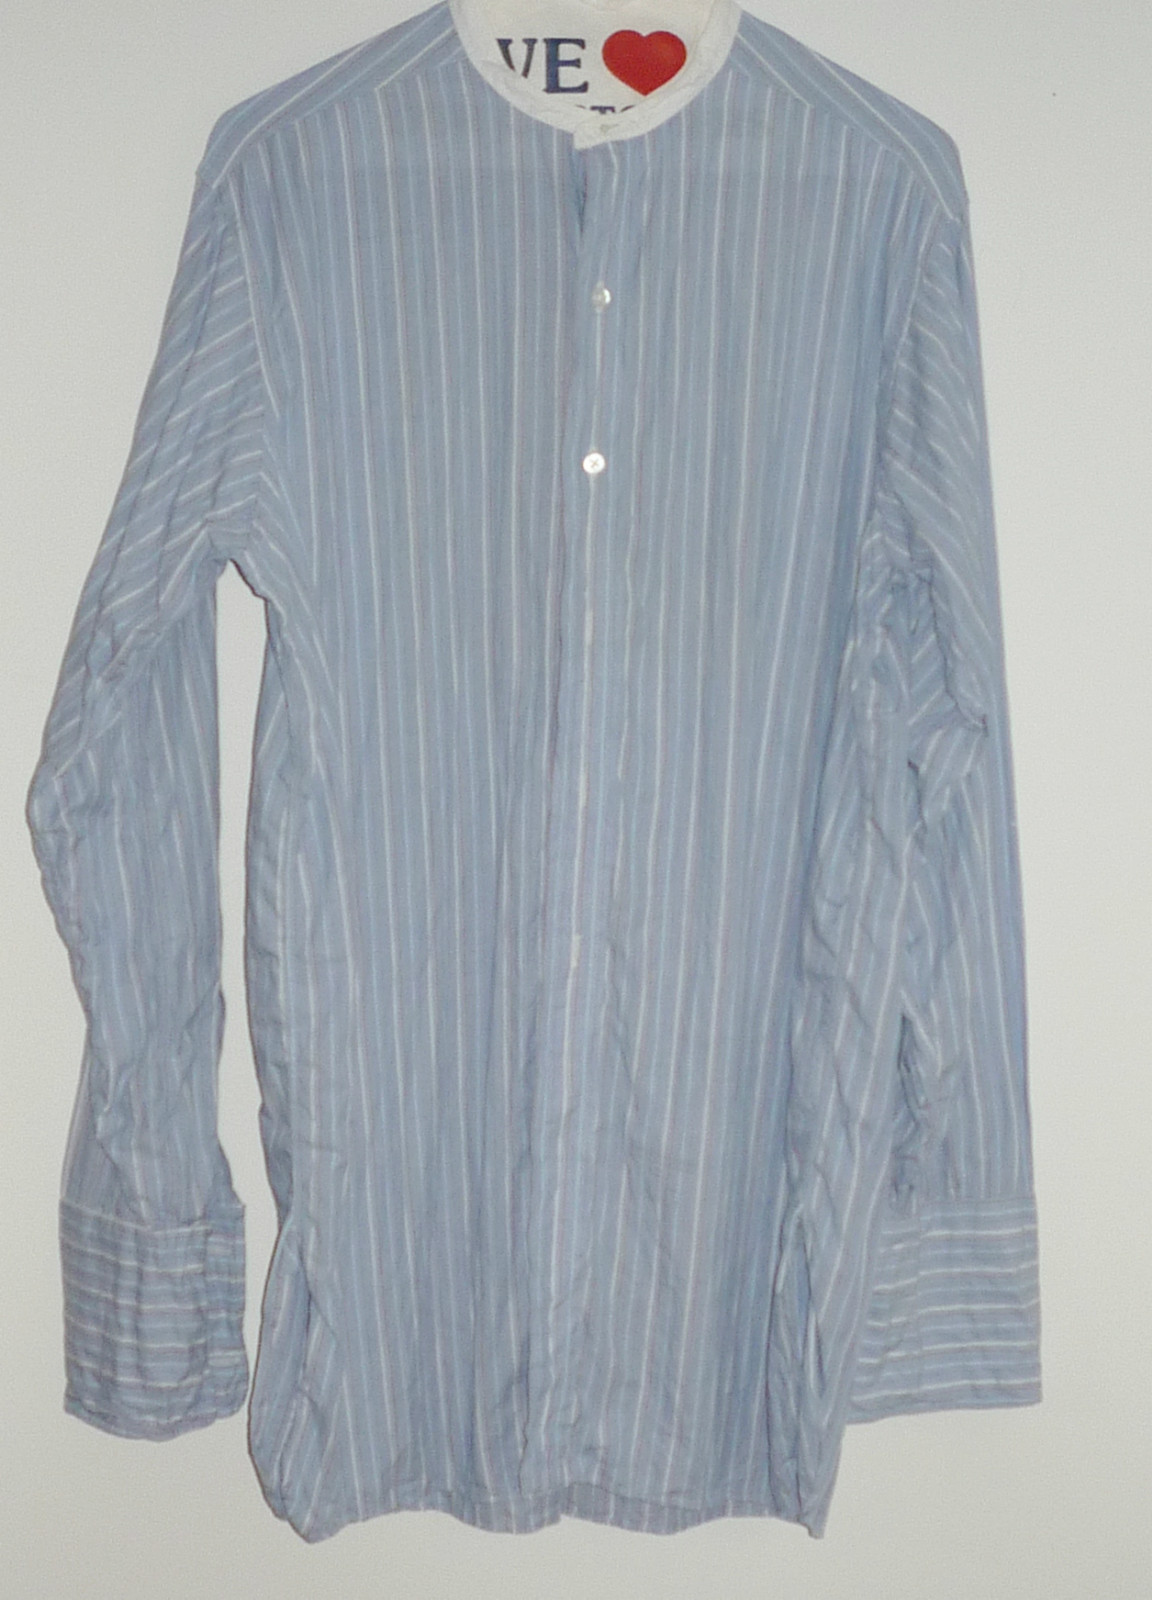 All The Pretty Dresses: 1930's Men's Button up Shirt with Original Collars